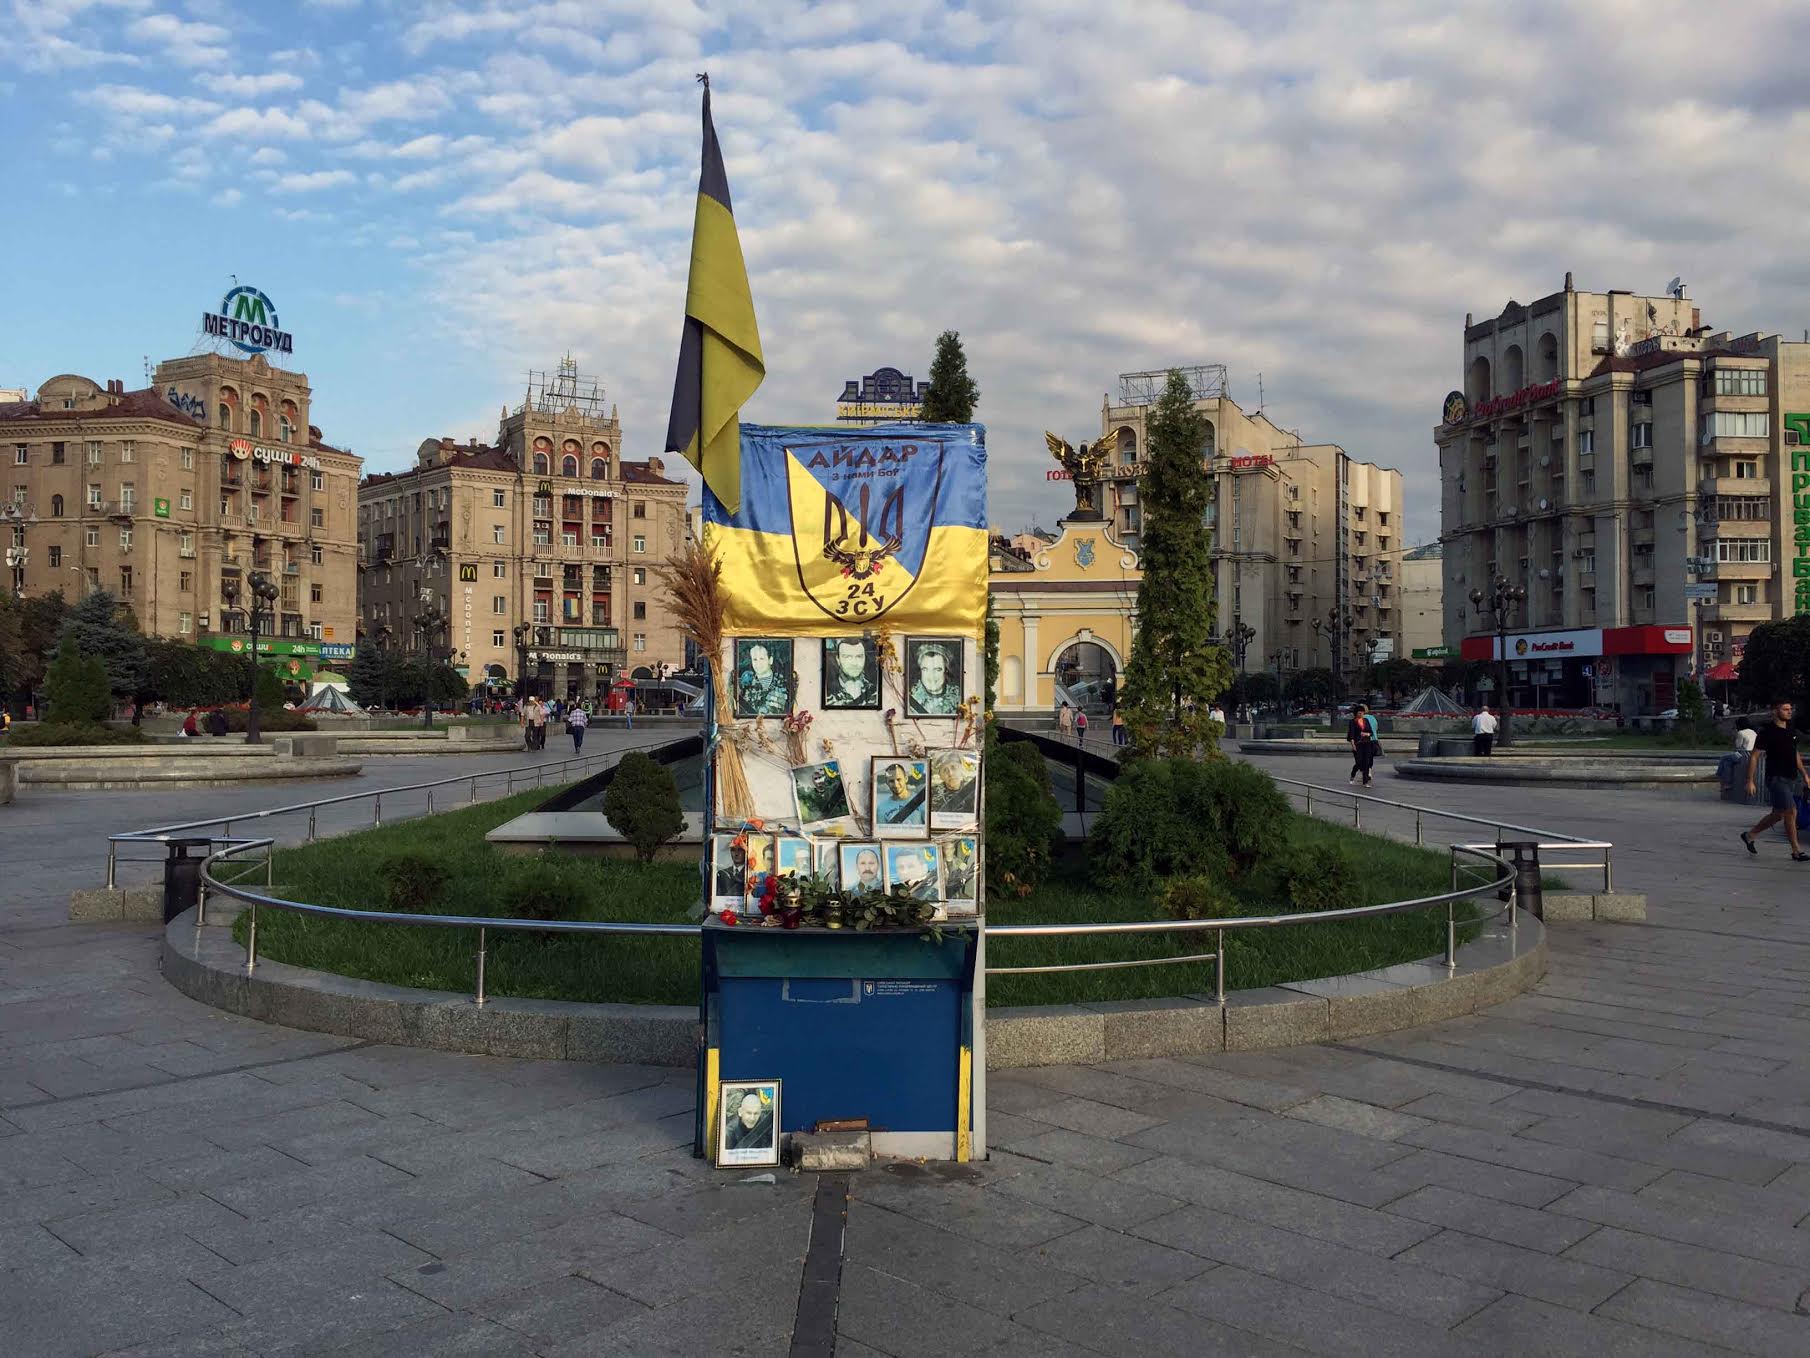 An informal monument to the heroes of the Euromaidan in 2013, situated on the central square (Maidan) in Kiev. In the background buildings from soviet times.